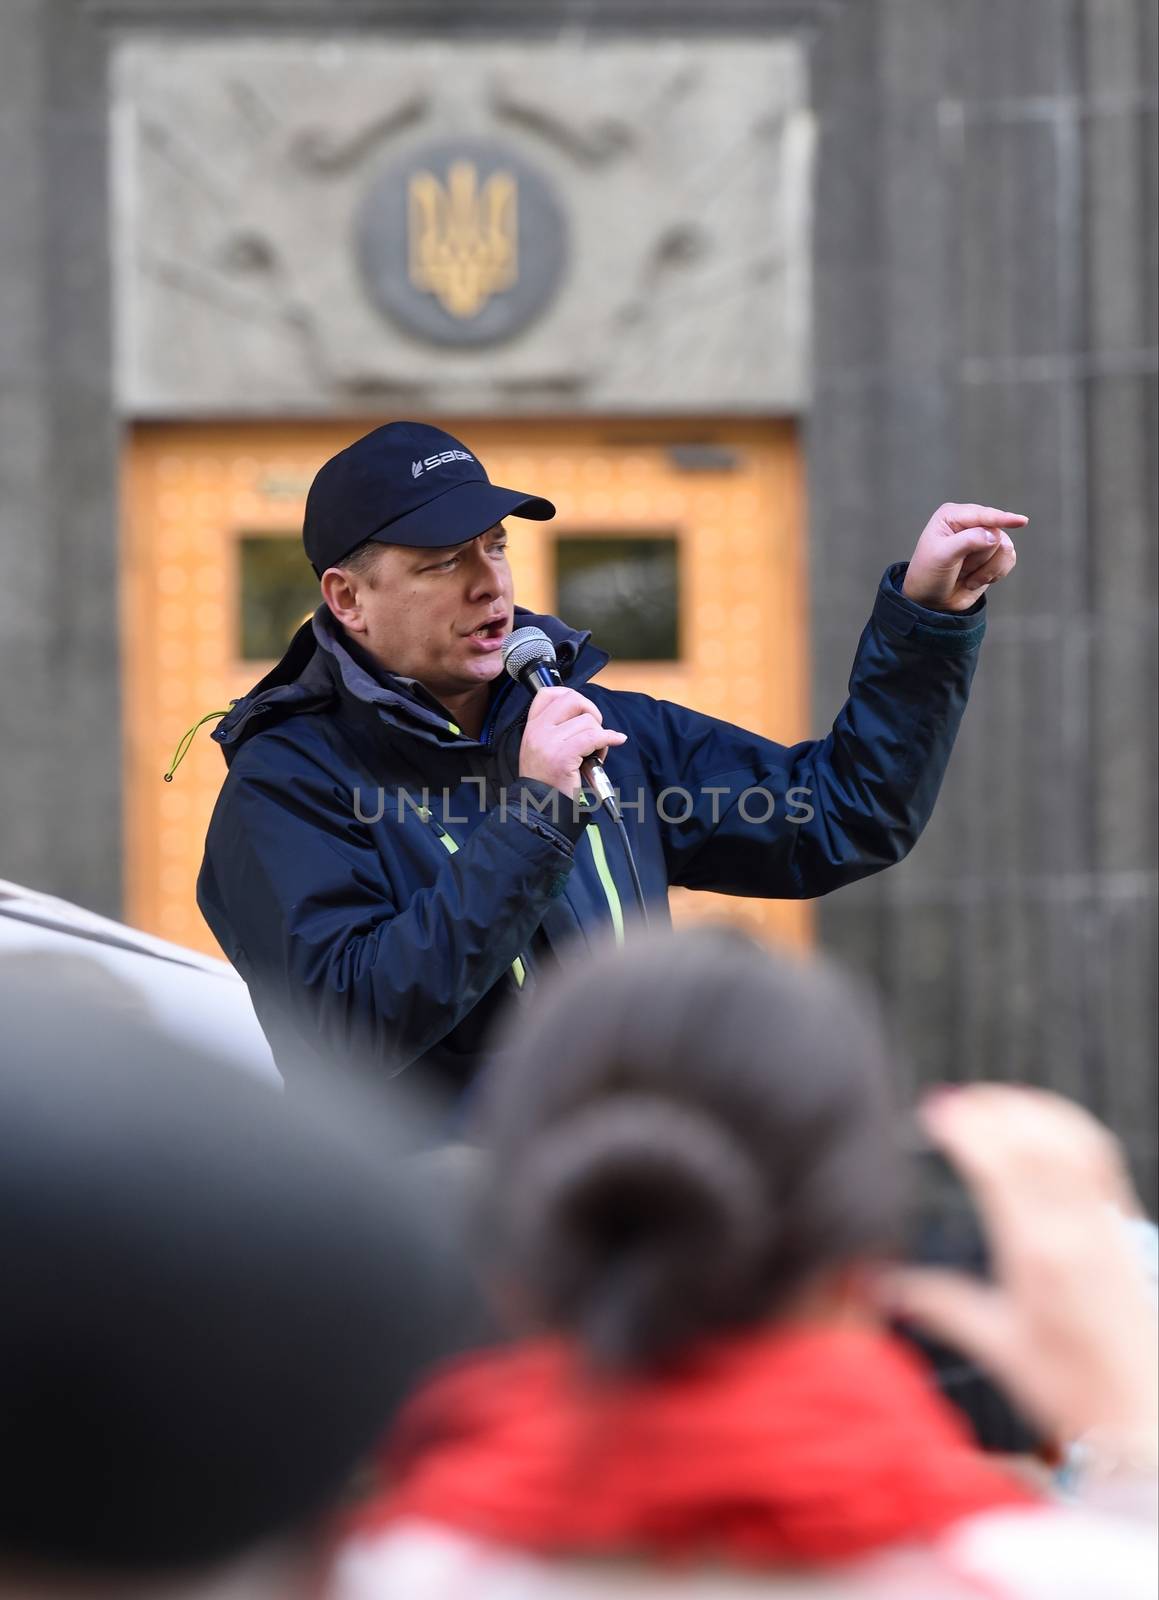 UKRAINE, Kiev: Radical Party leader Oleg Lyashko leads a protest outside the Cabinet of Ministers in Kiev, Ukraine on October 27, 2015, continuing a weeklong encampment as part of the Tariff Maidan protests. The movement calls on the government to establish fair utility tariffs for Ukraine, considered too high by protesters; along with the resignation of the president, prime minister, and cabinet of ministers.